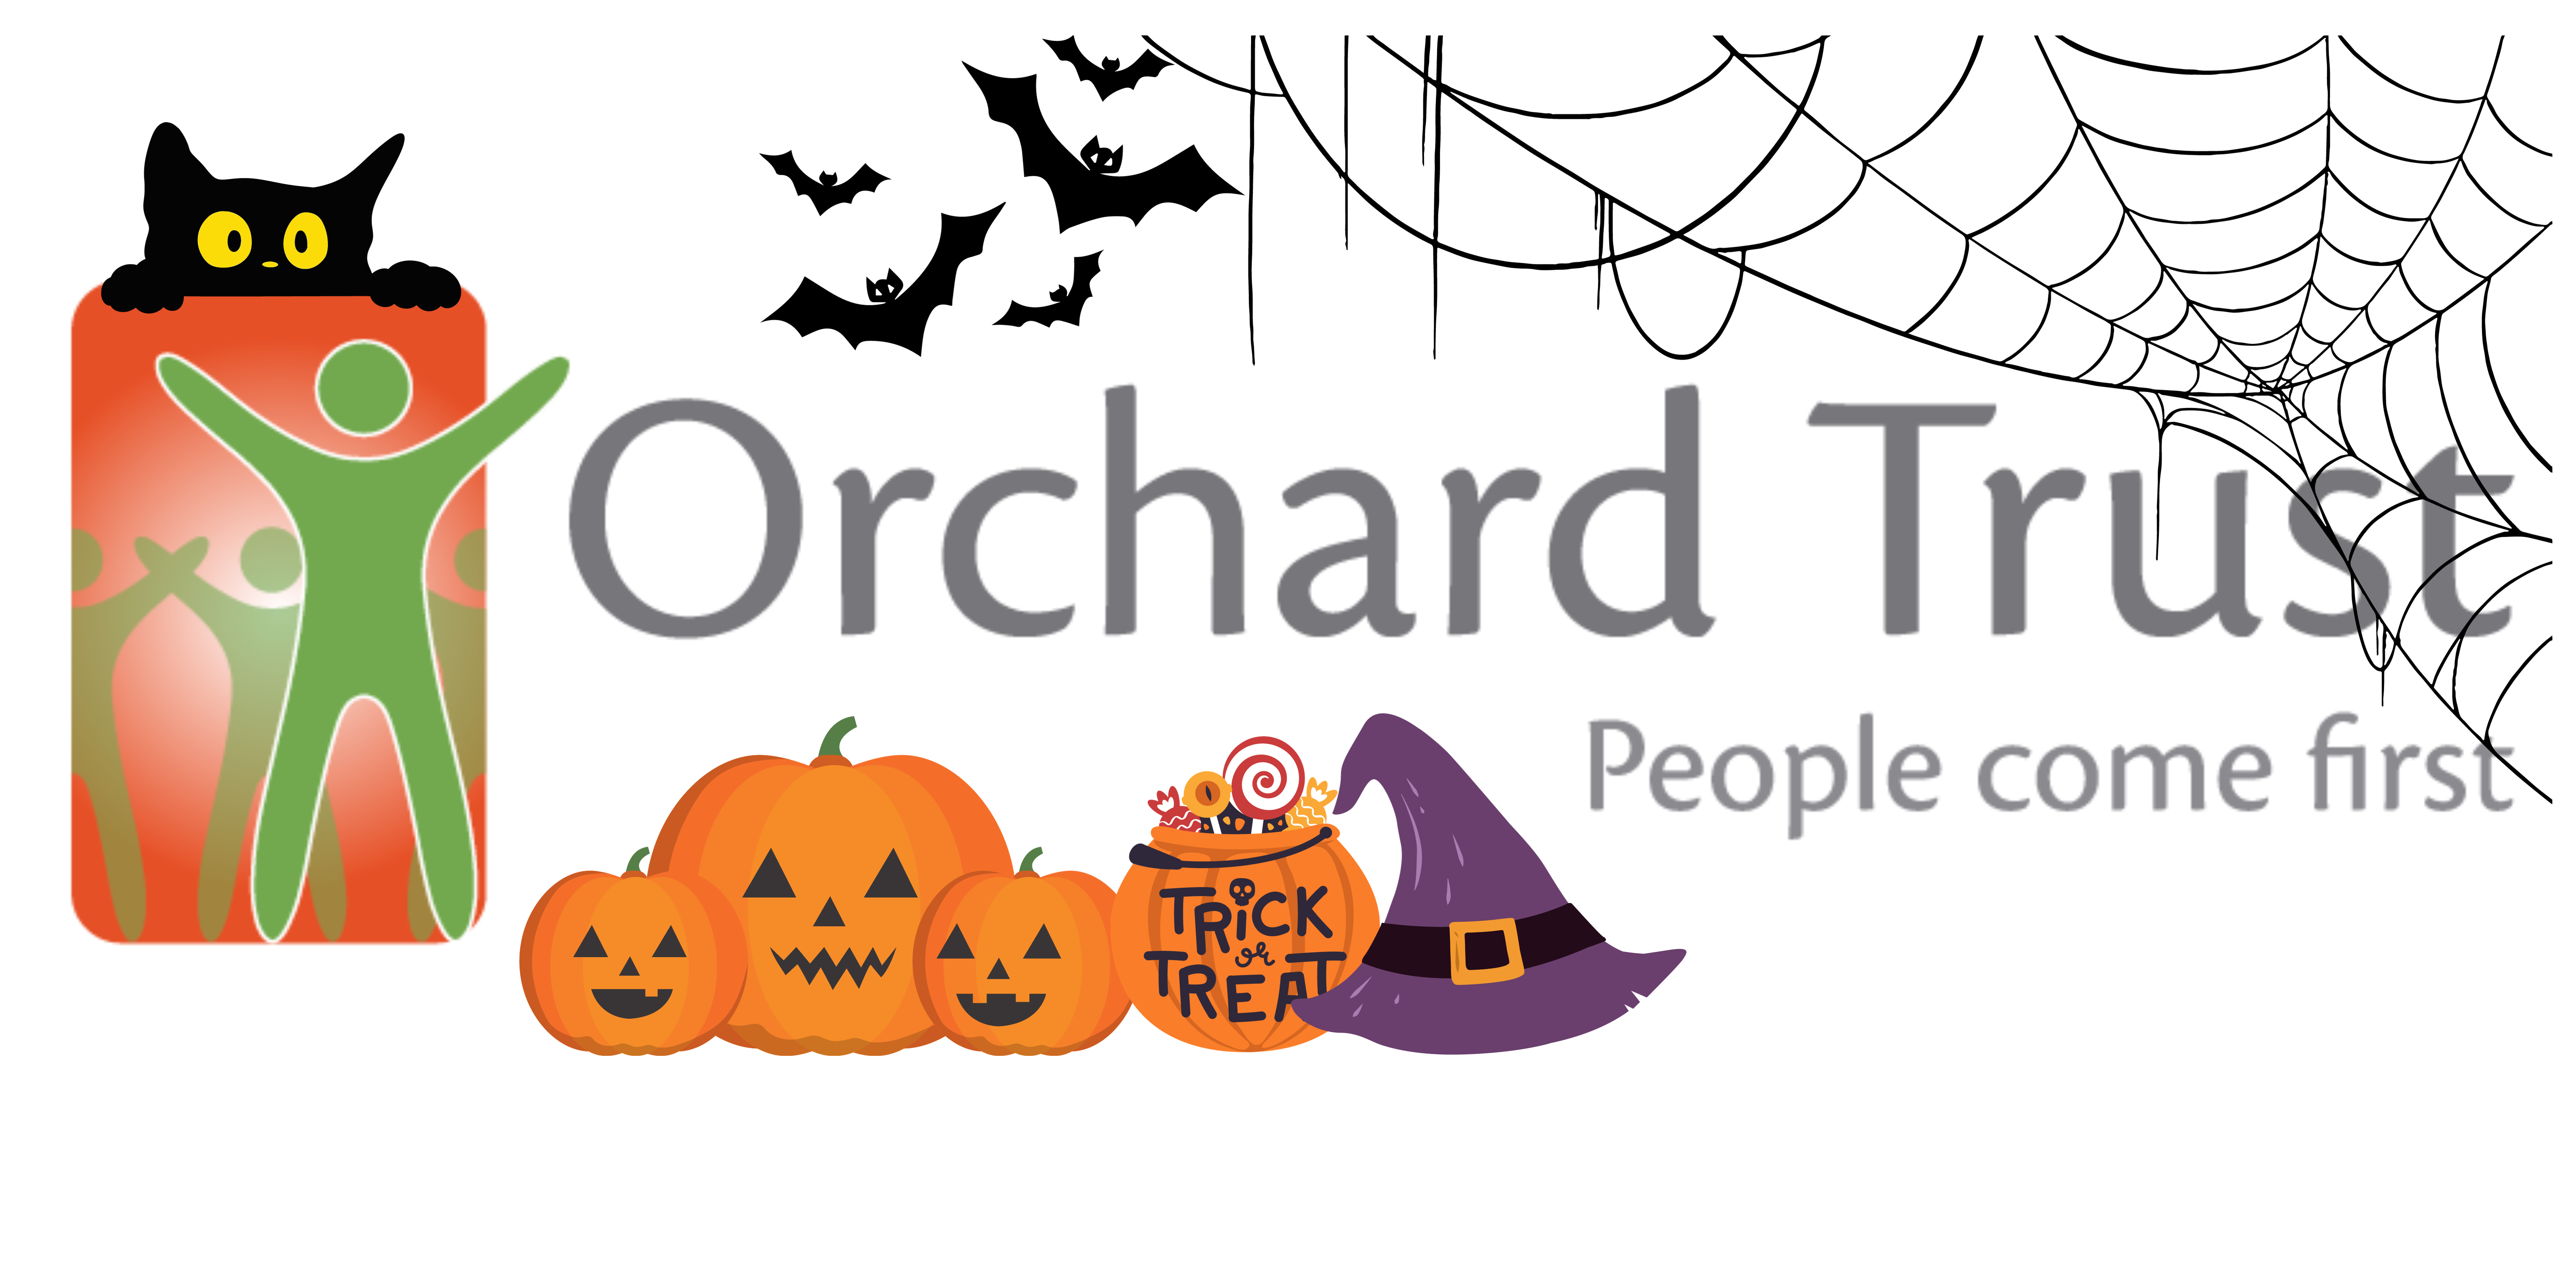 orchard trust logo with cobwebs, a black cat, pumpkins and a purple witches hat